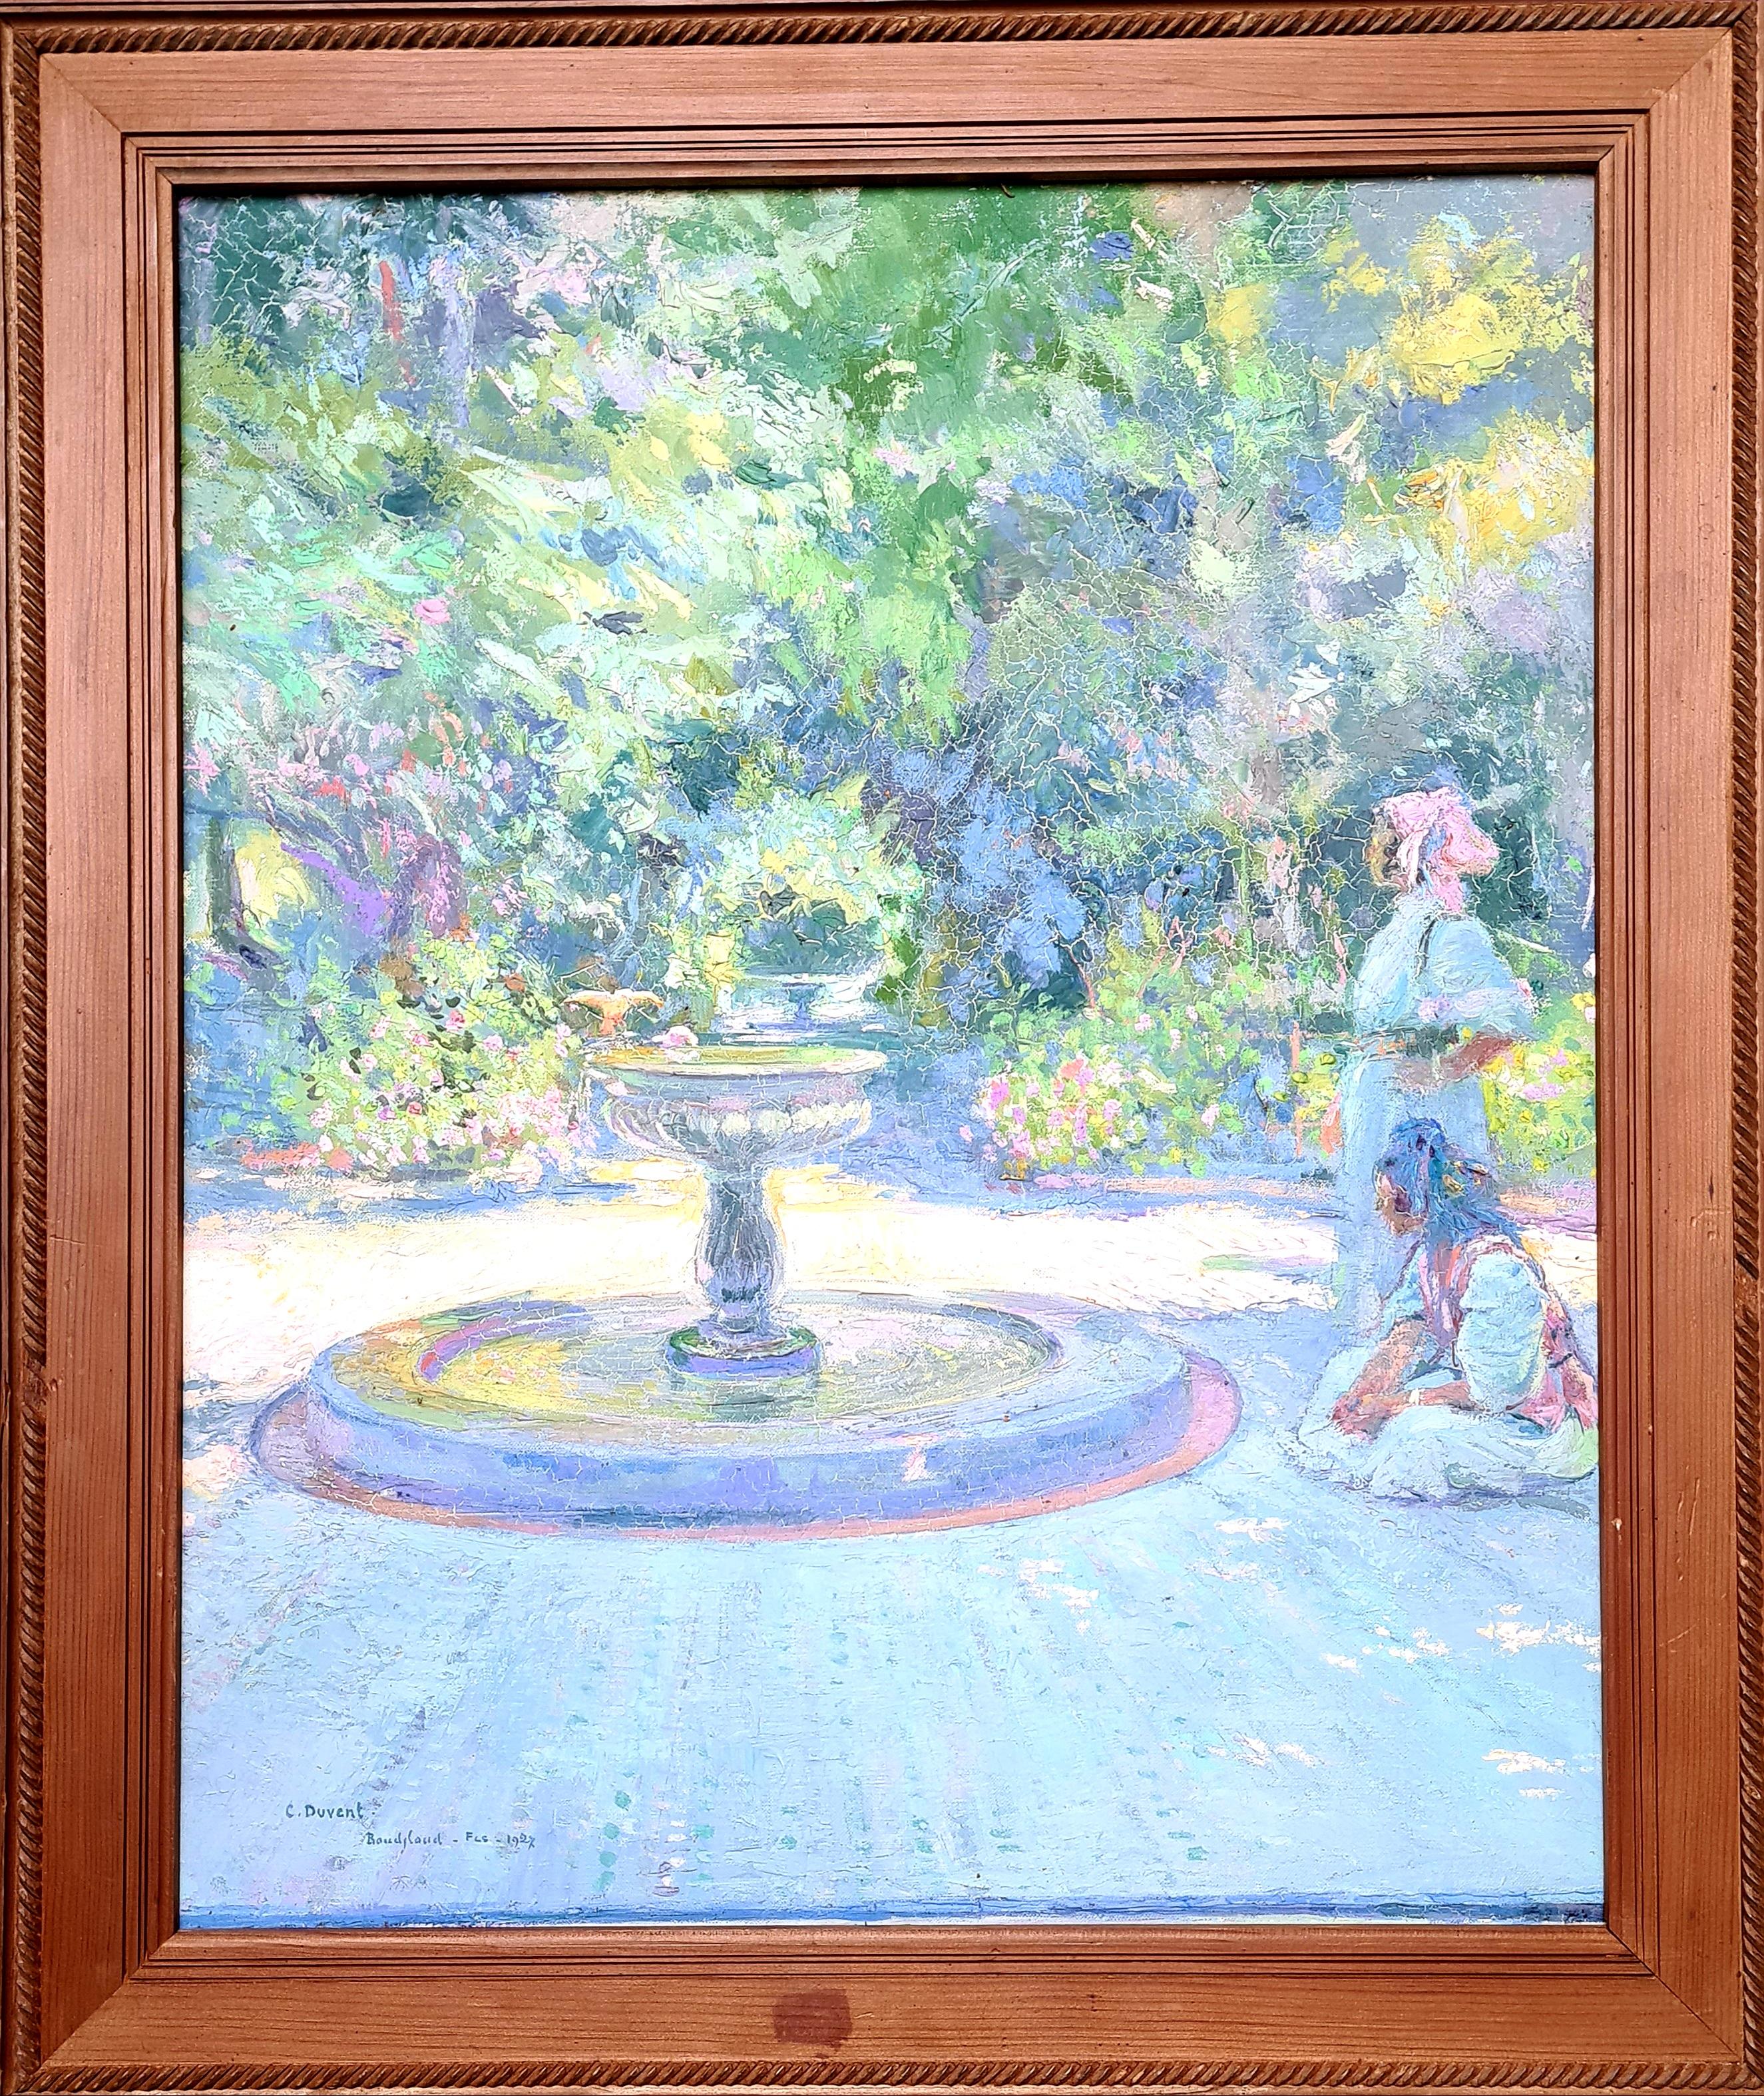 Orientalist Garden, Boujloud, Fès, Ladies at the Fountain. Oil on Canvas. - Impressionist Painting by Charles Duvent